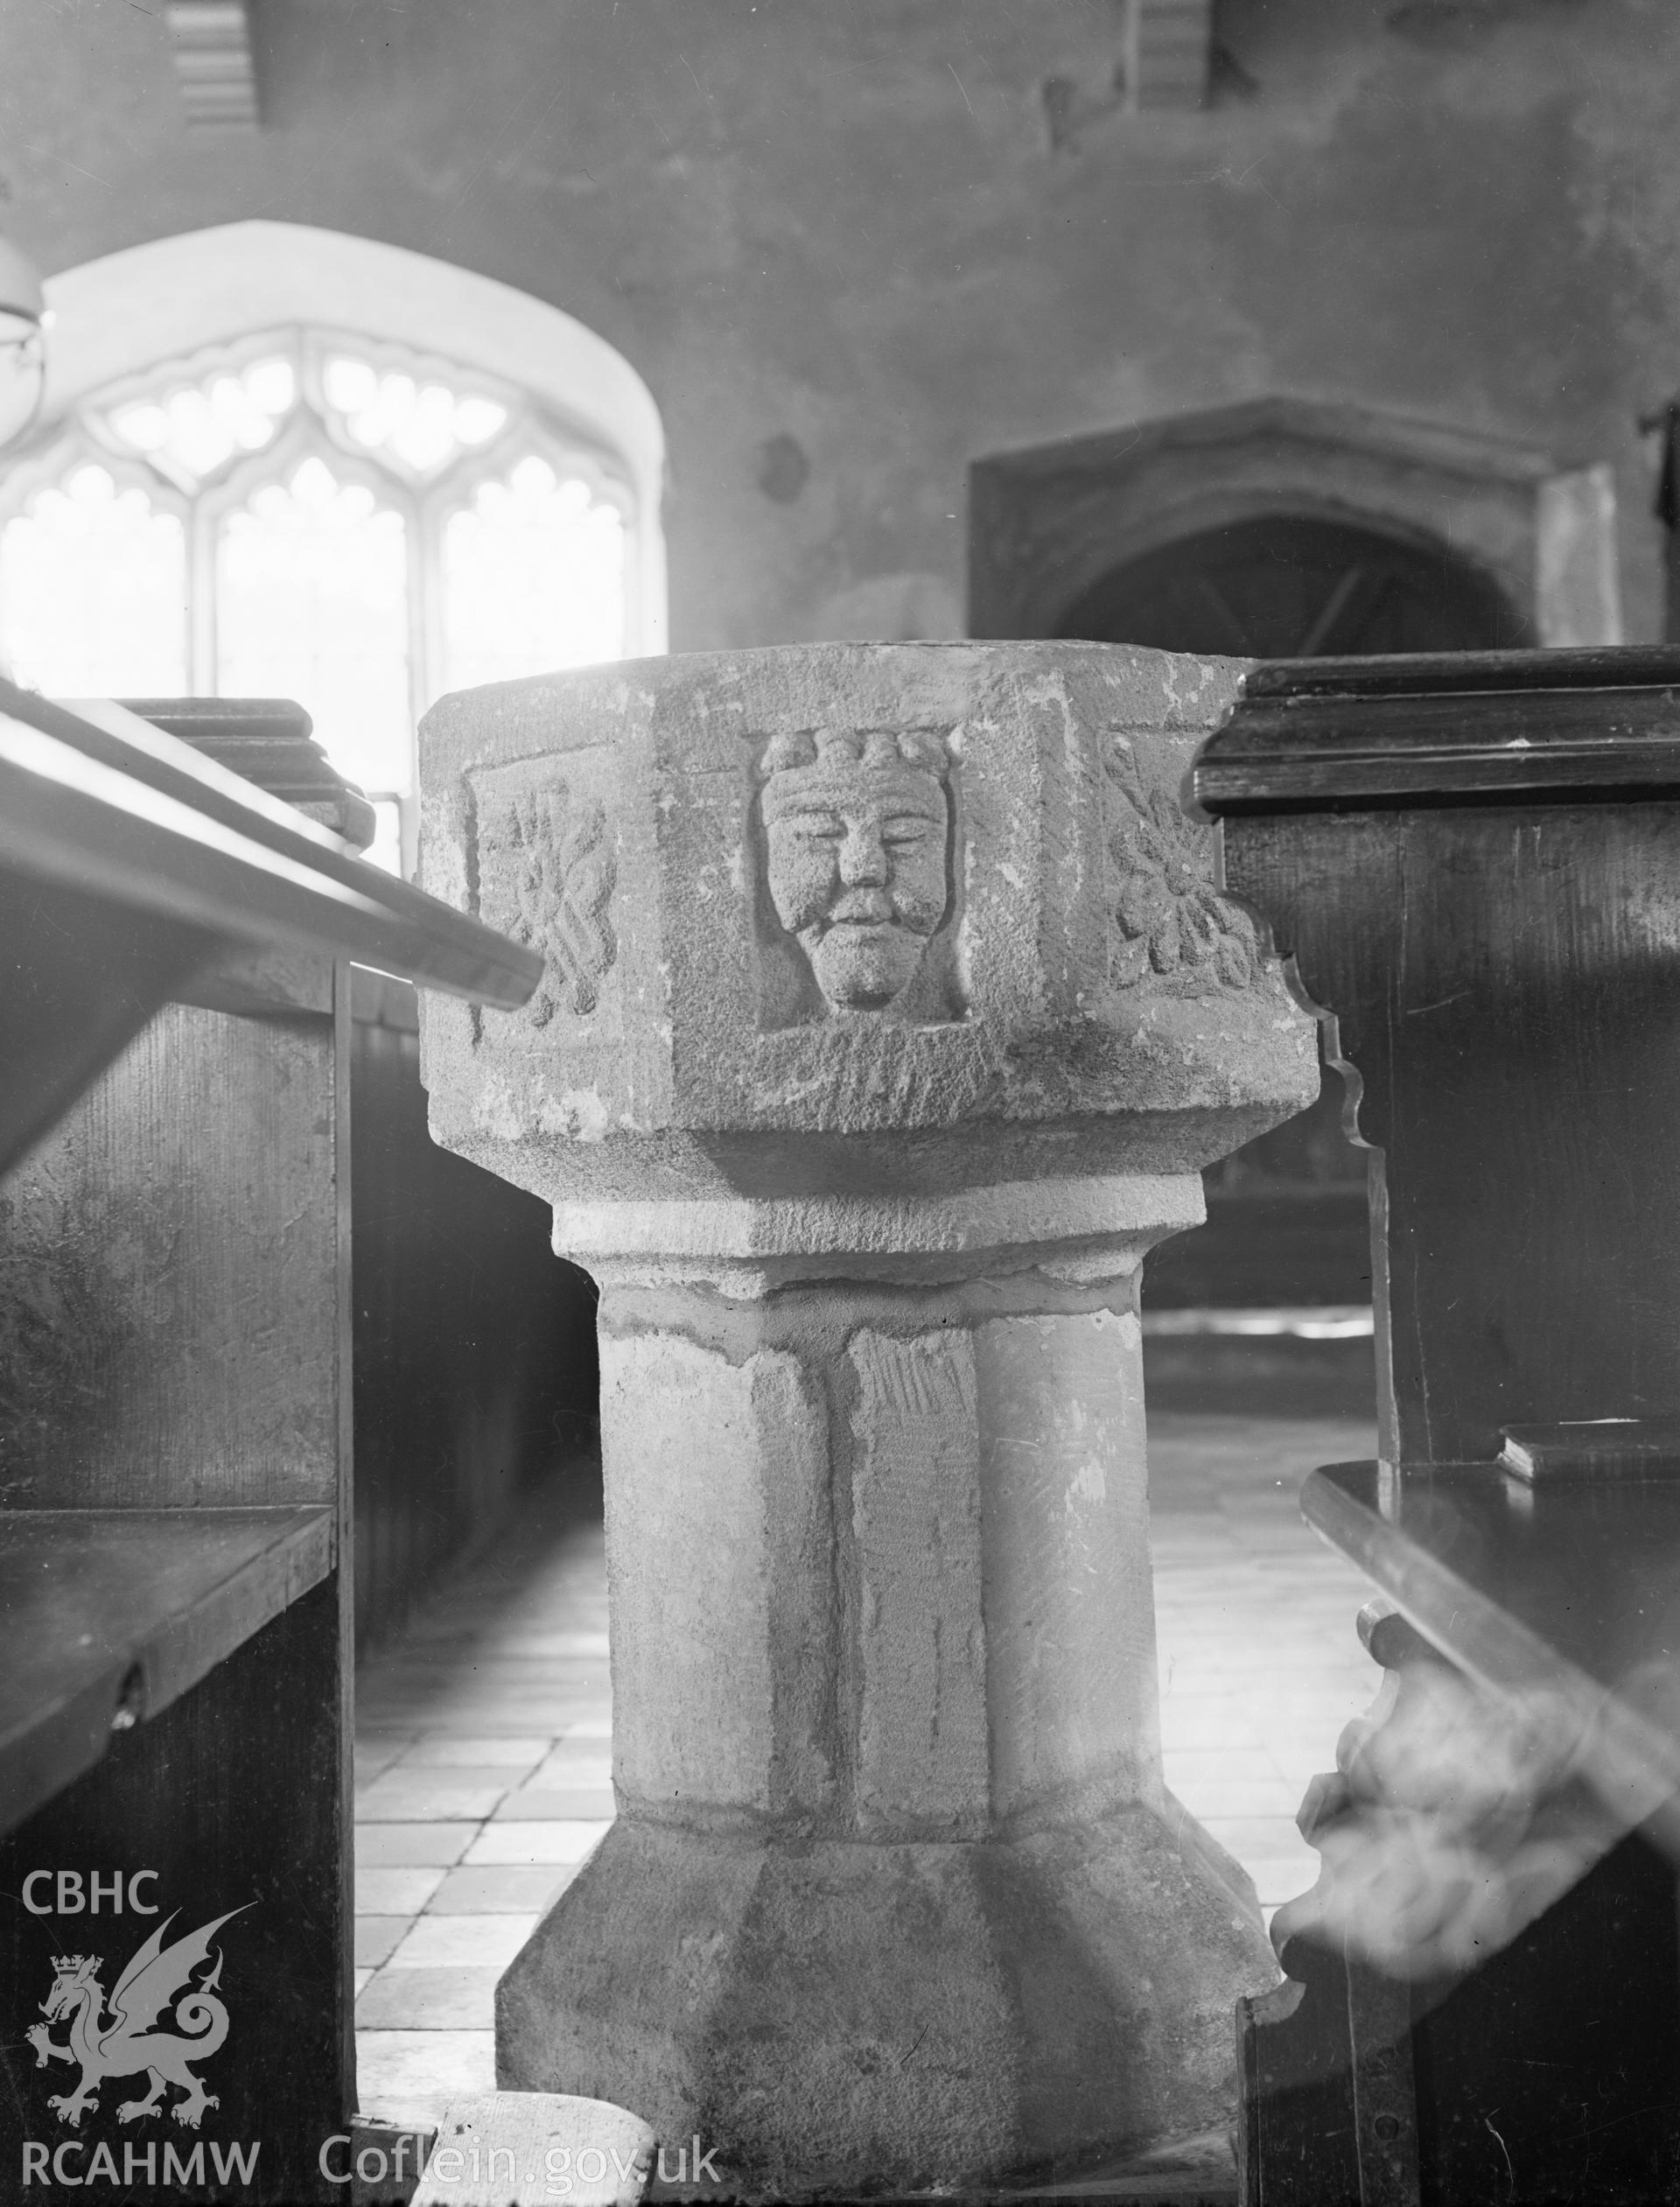 Black and white nitrate negative showing the font at Llangwnadl Church.